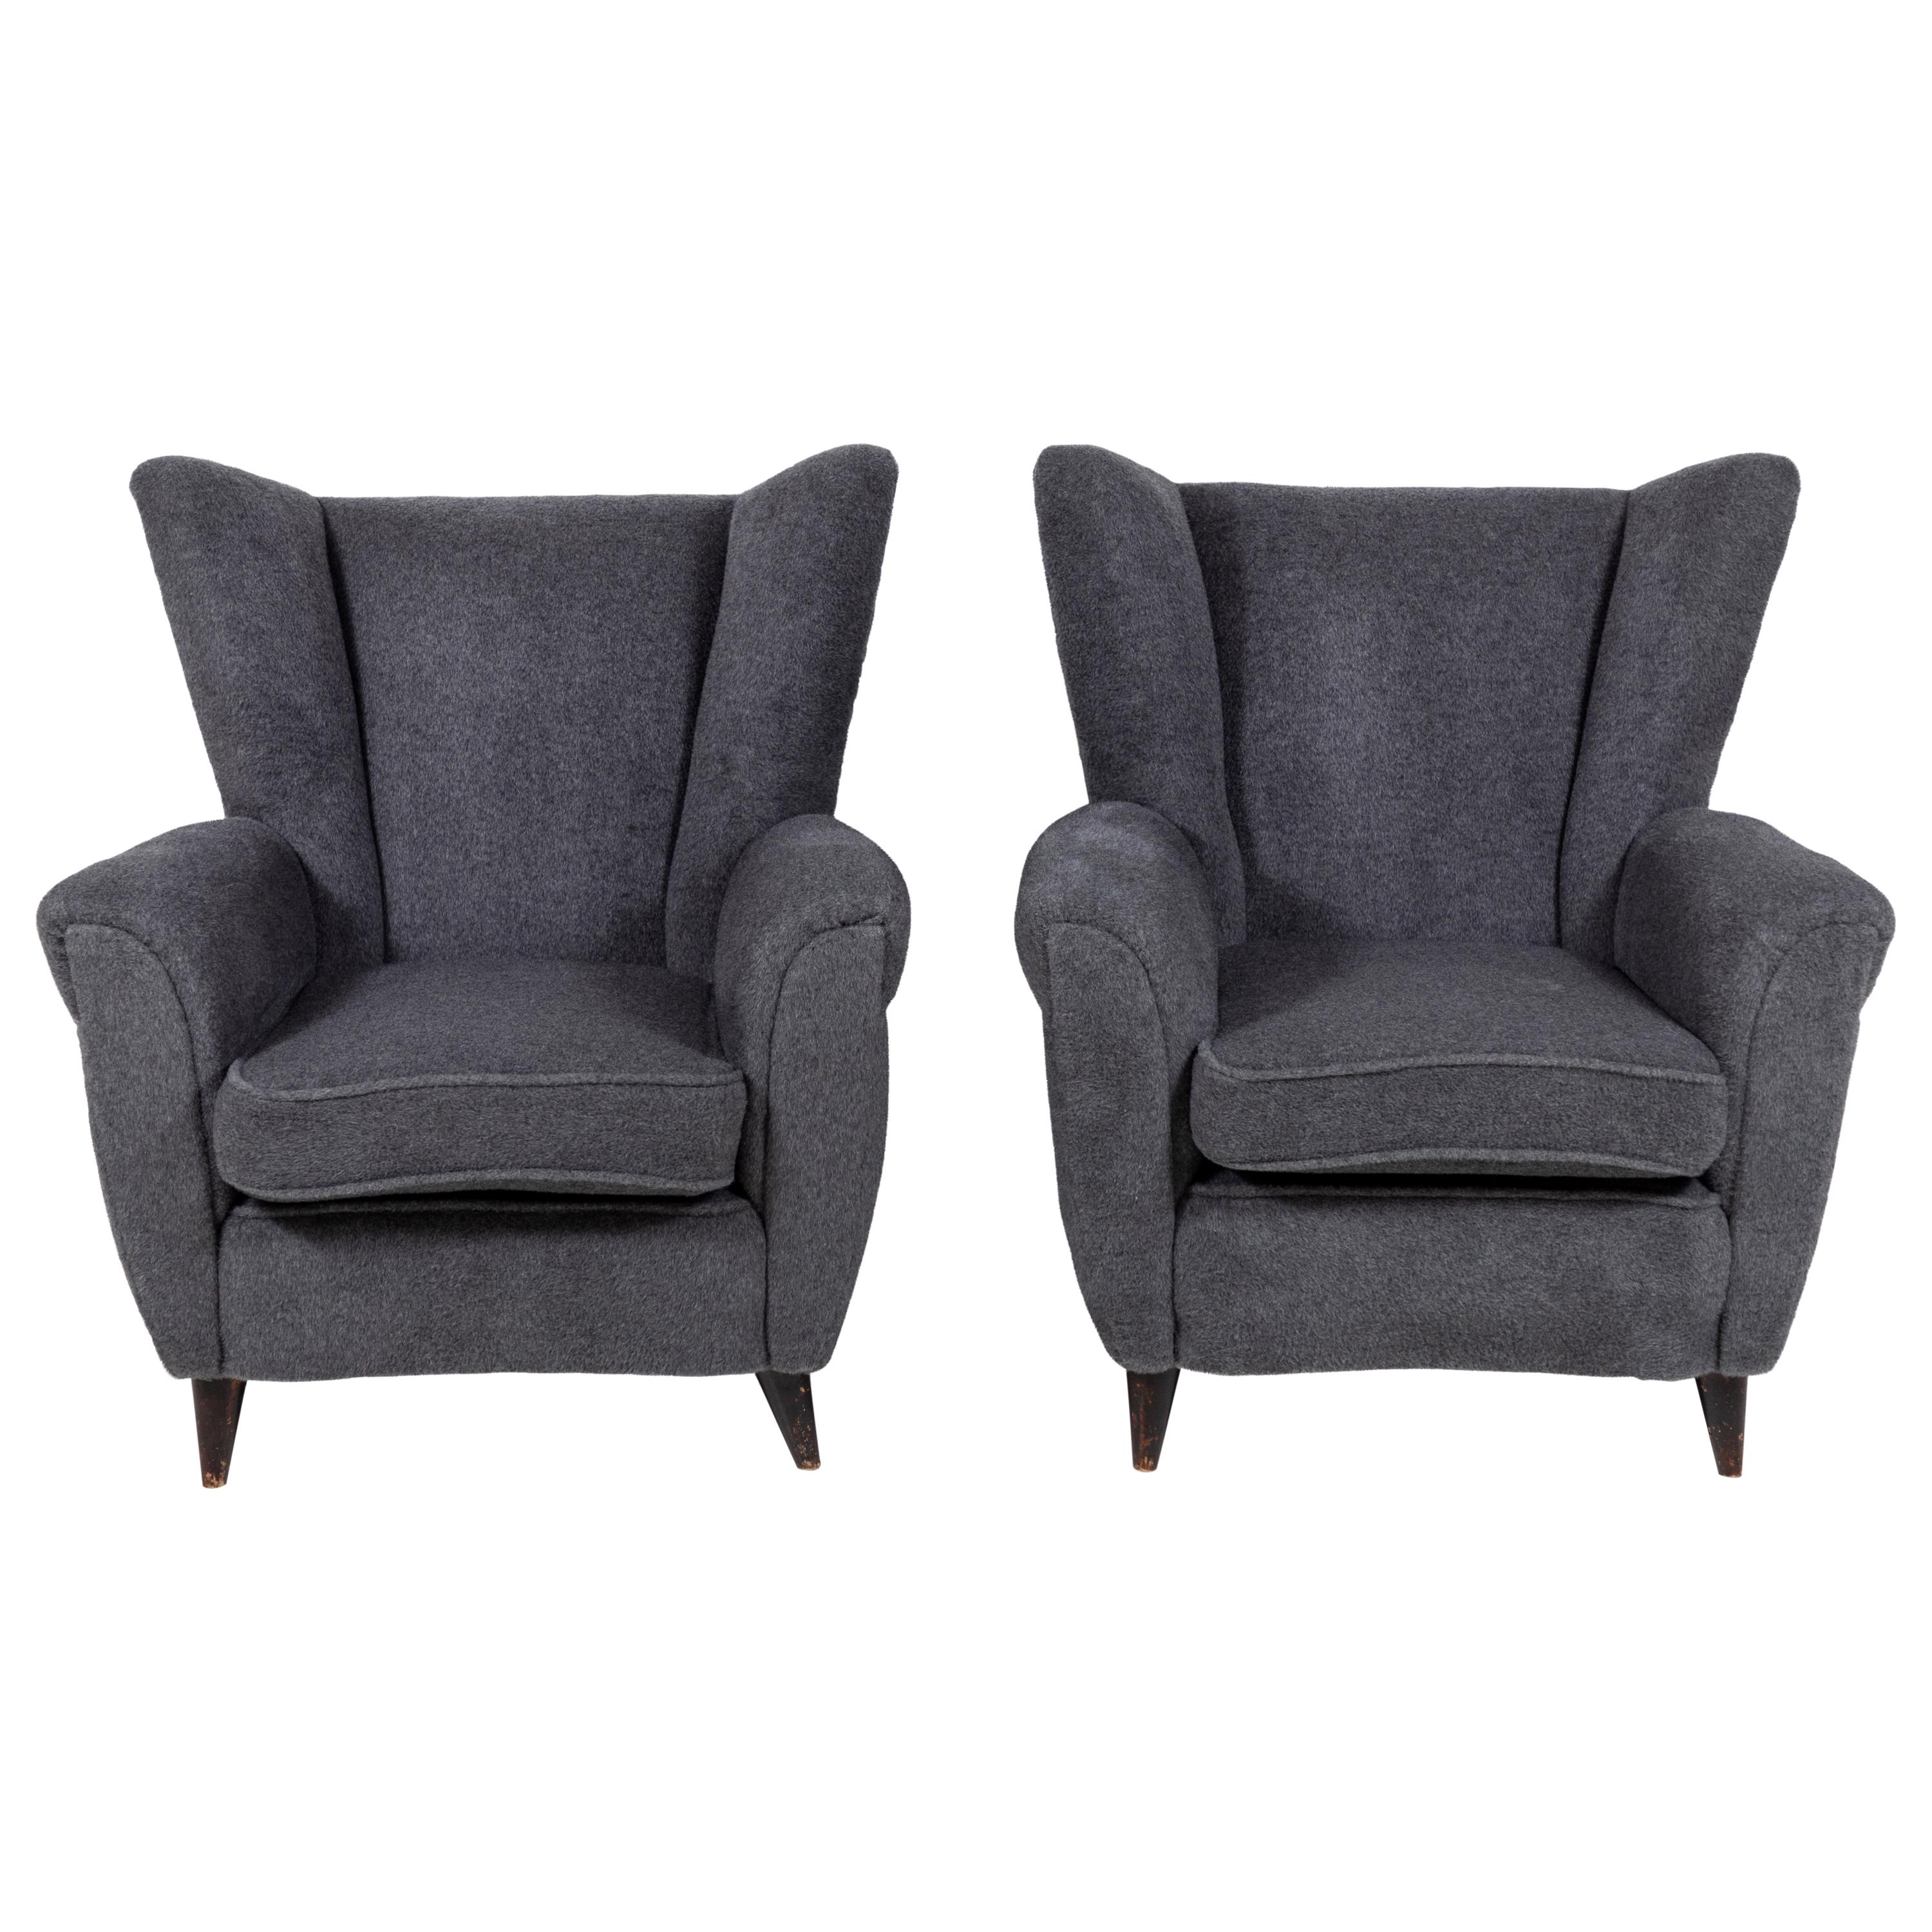 Pair of French Midcentury Wingback Chairs